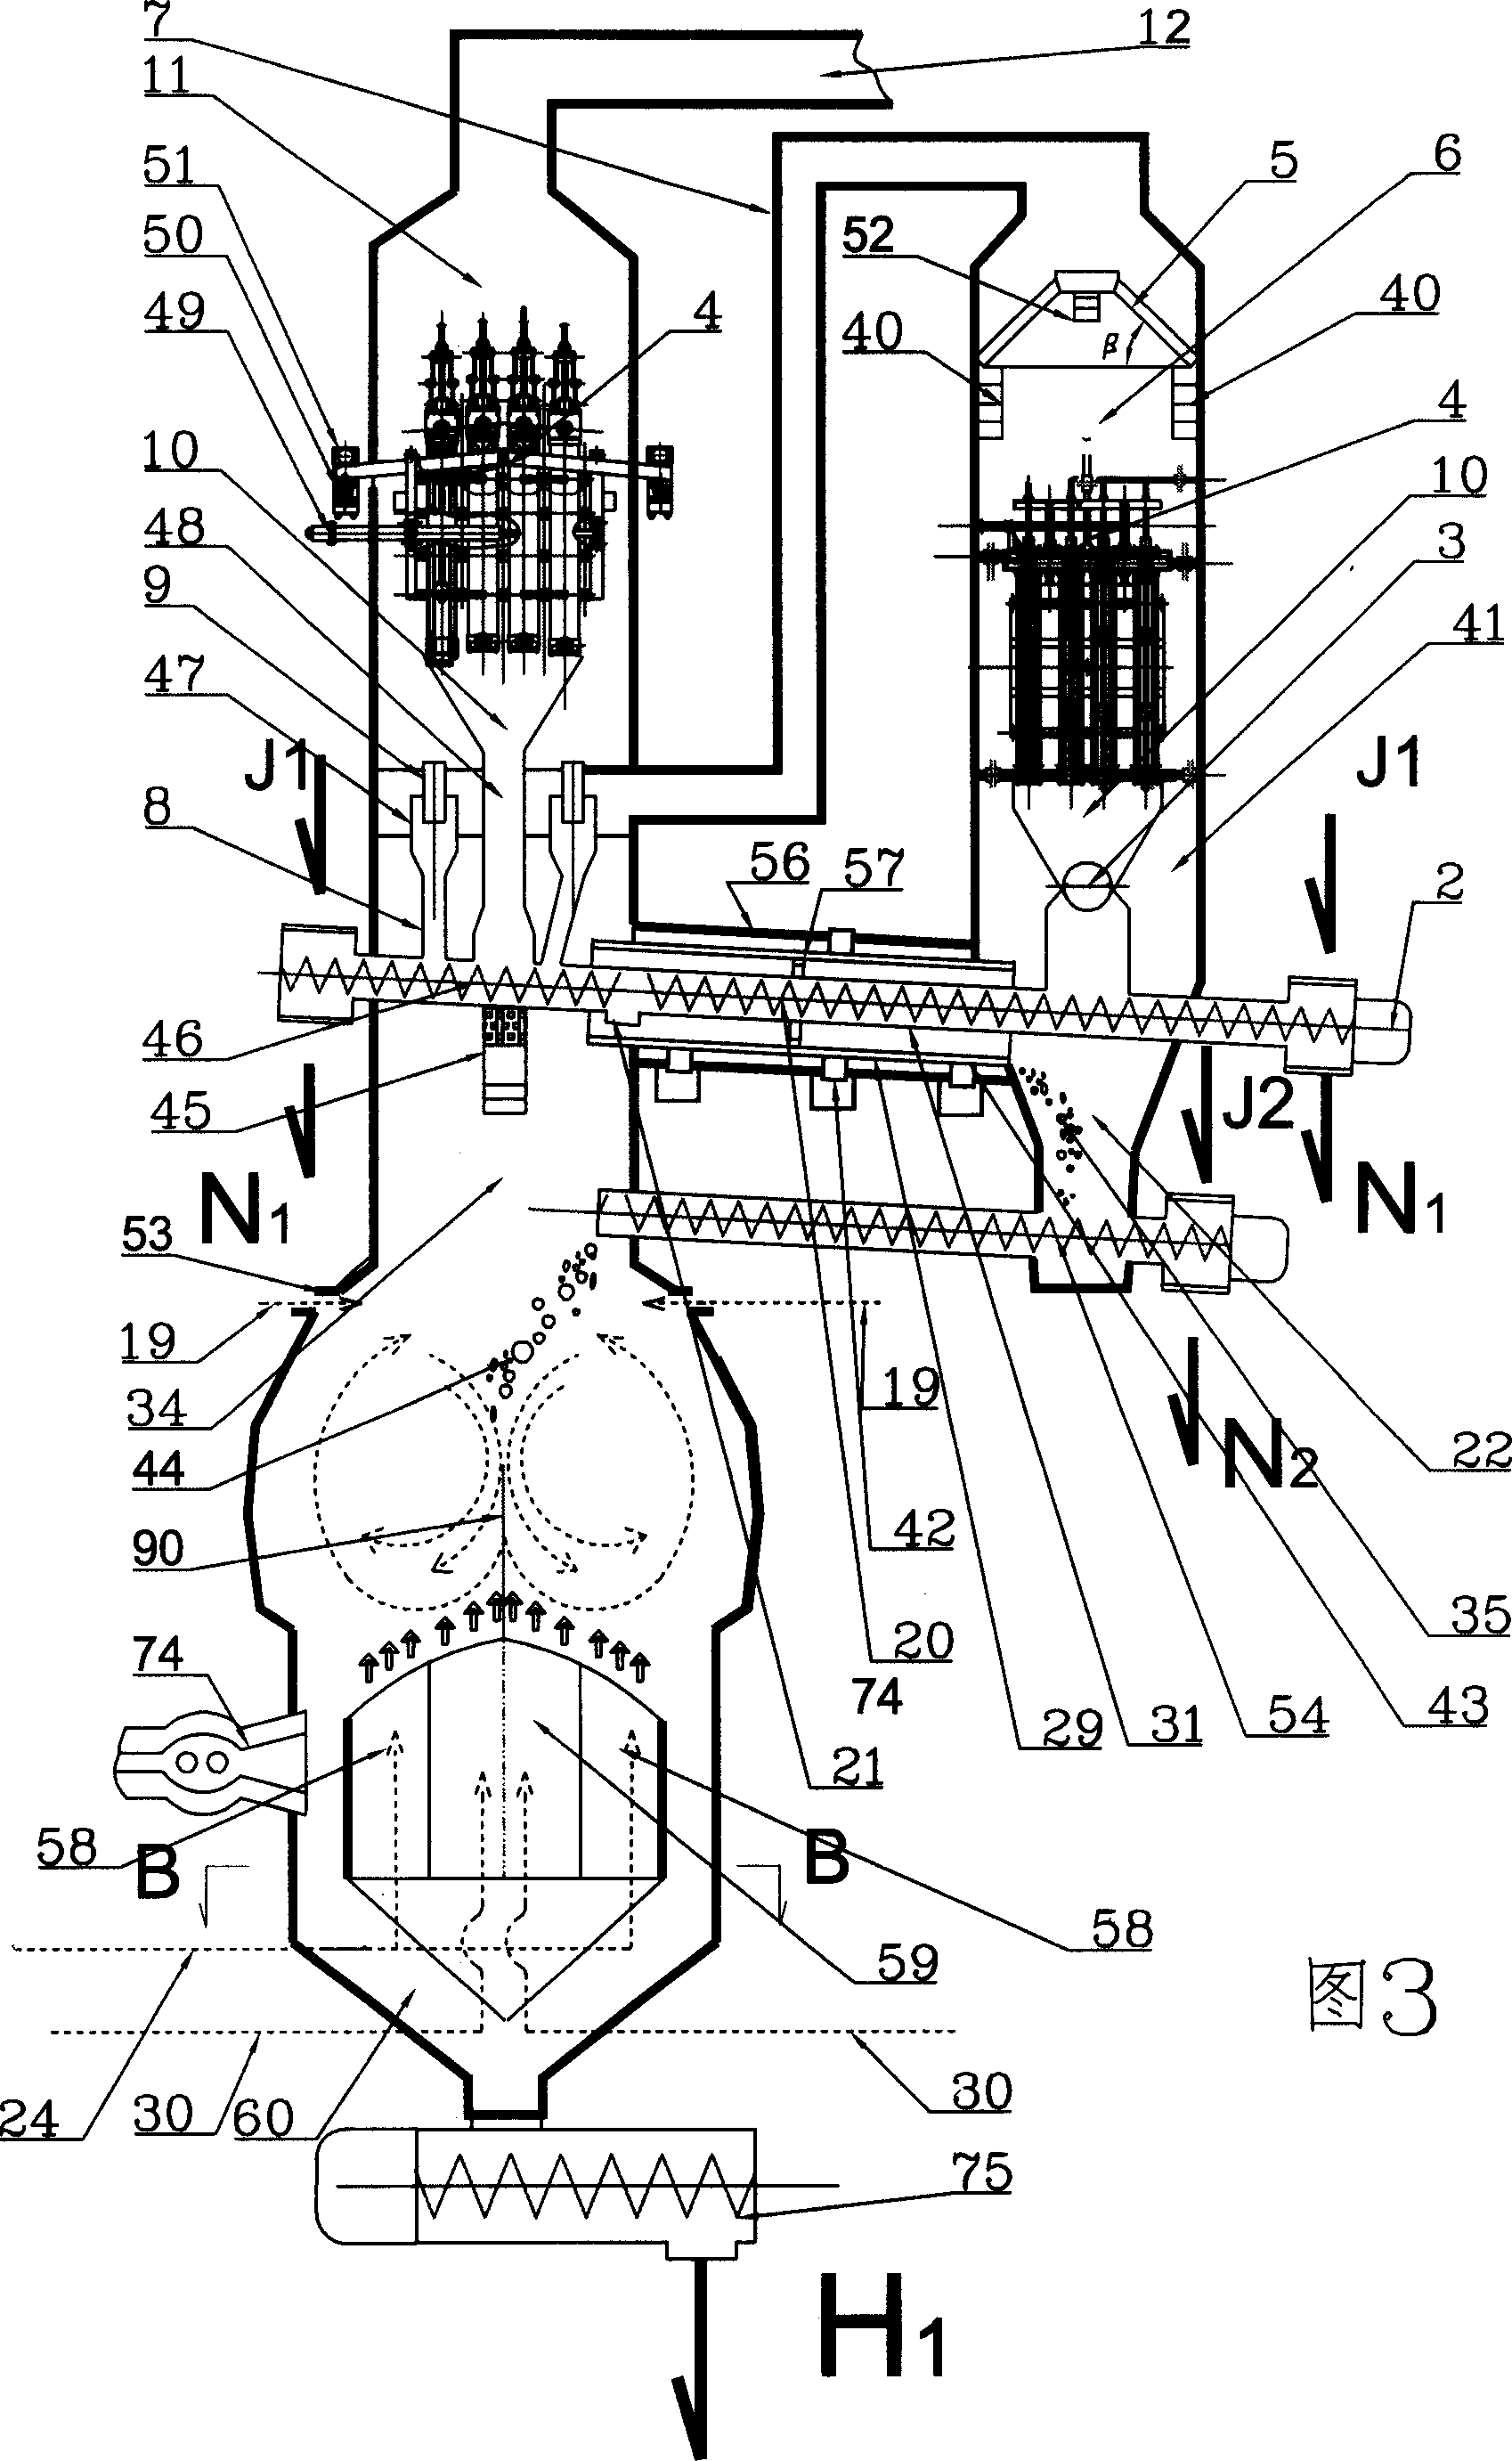 Solid-liquid treating machine and its heating system